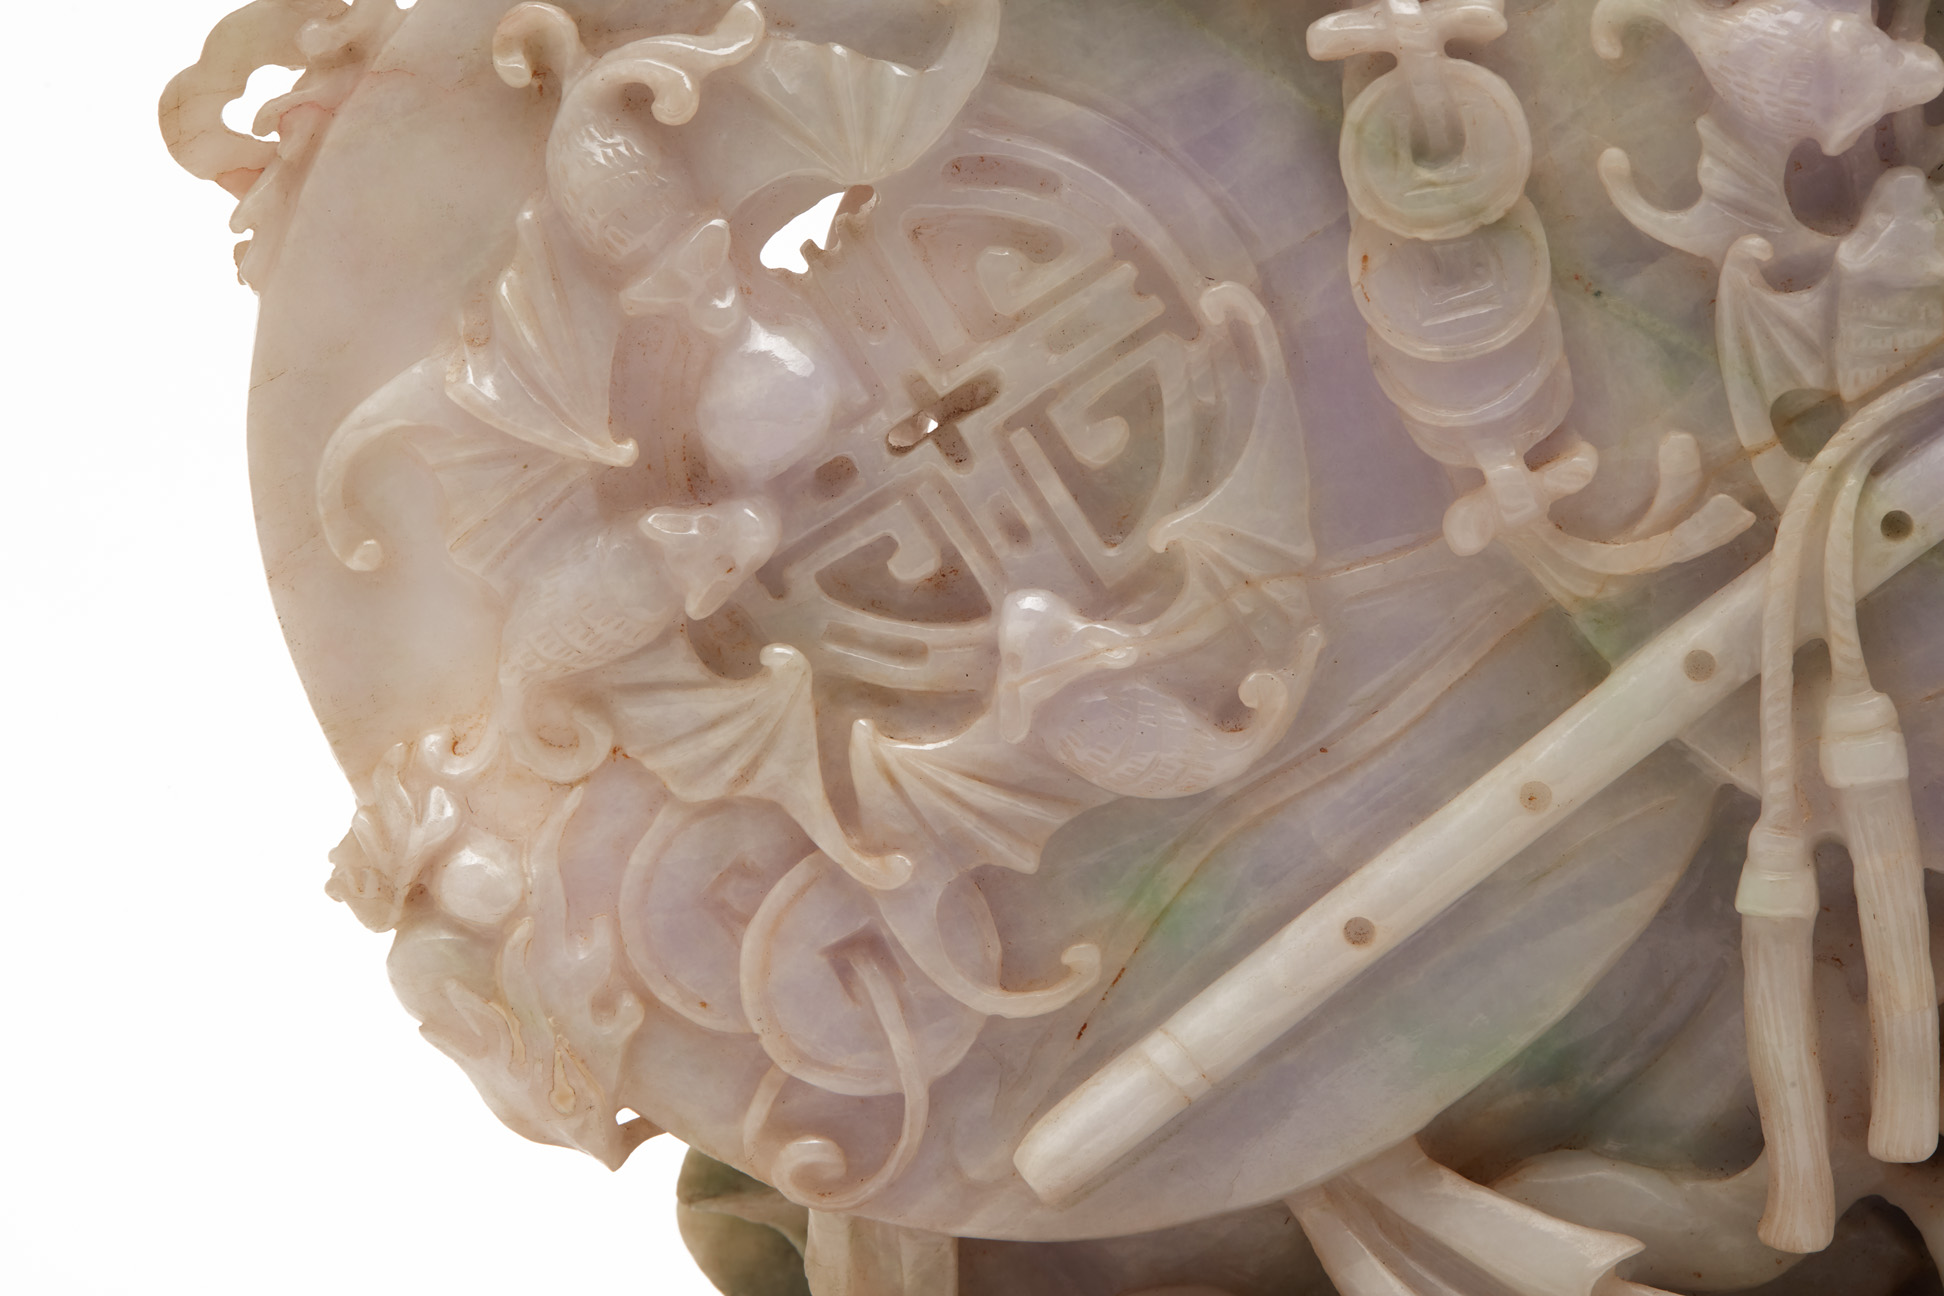 AN INTRICATE JADE CARVING OF BUDAI - Image 9 of 9